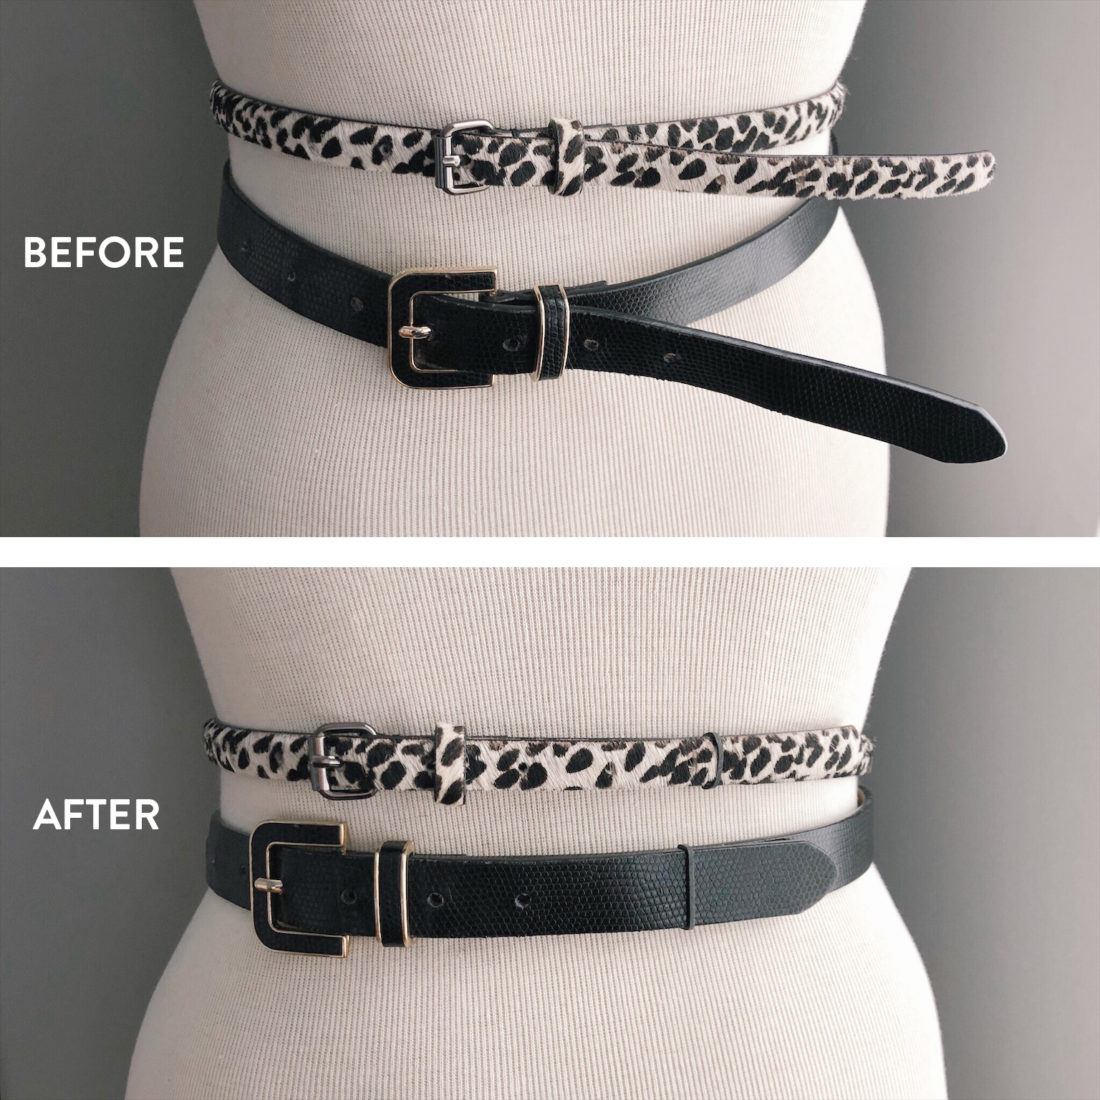 How to make a waistband fit better?